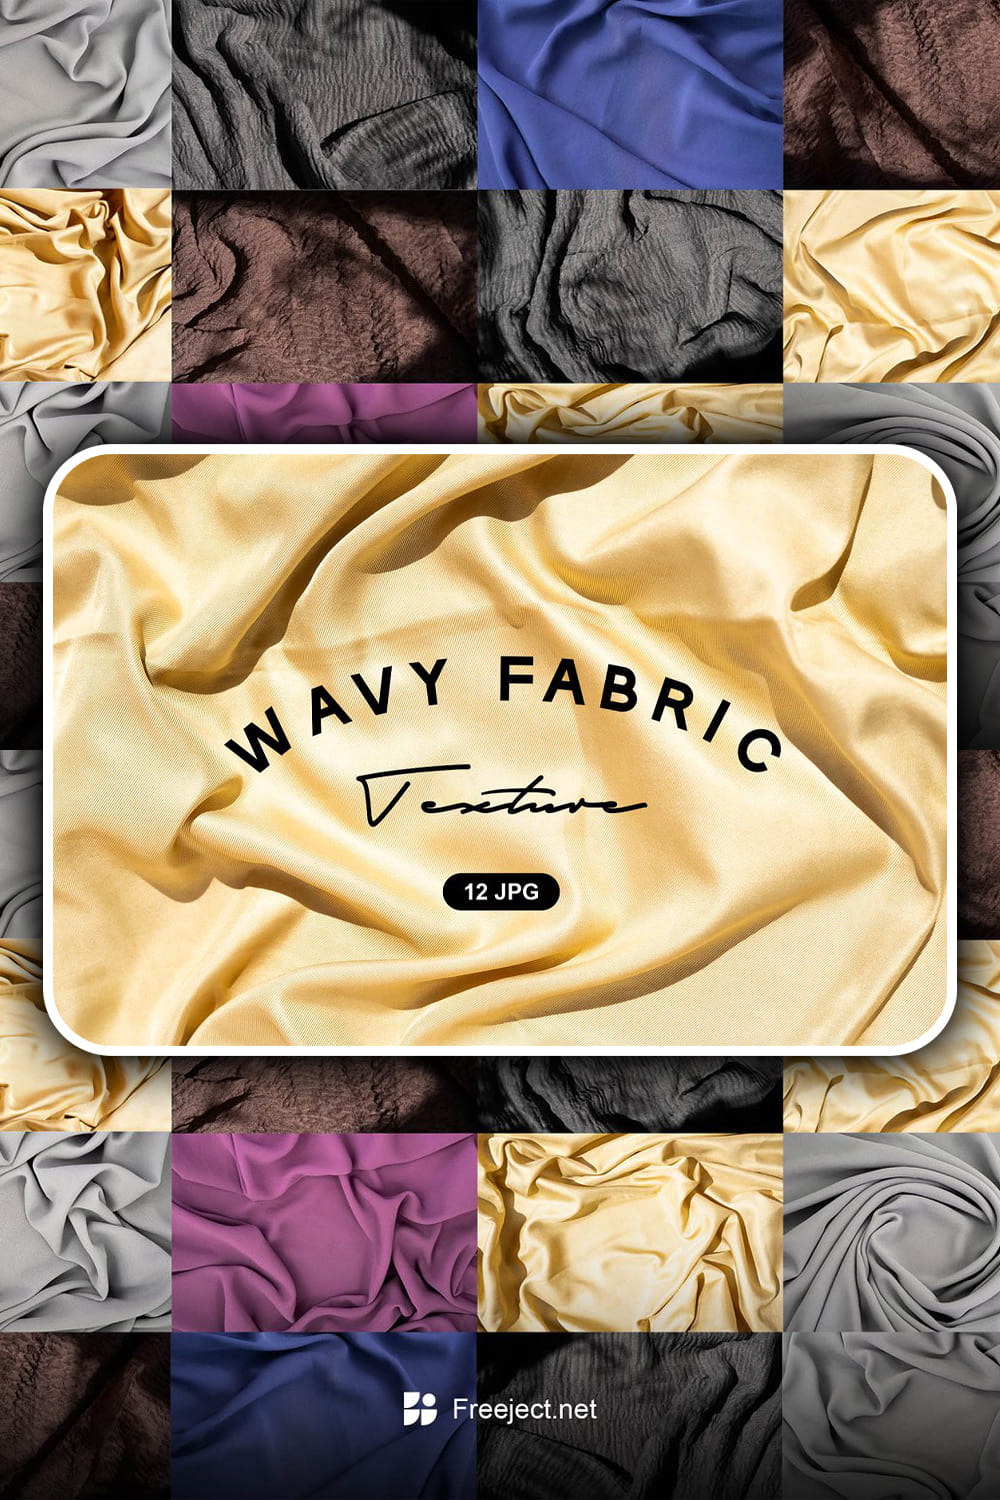 Wavy fabric texture background - pinterest image preview.